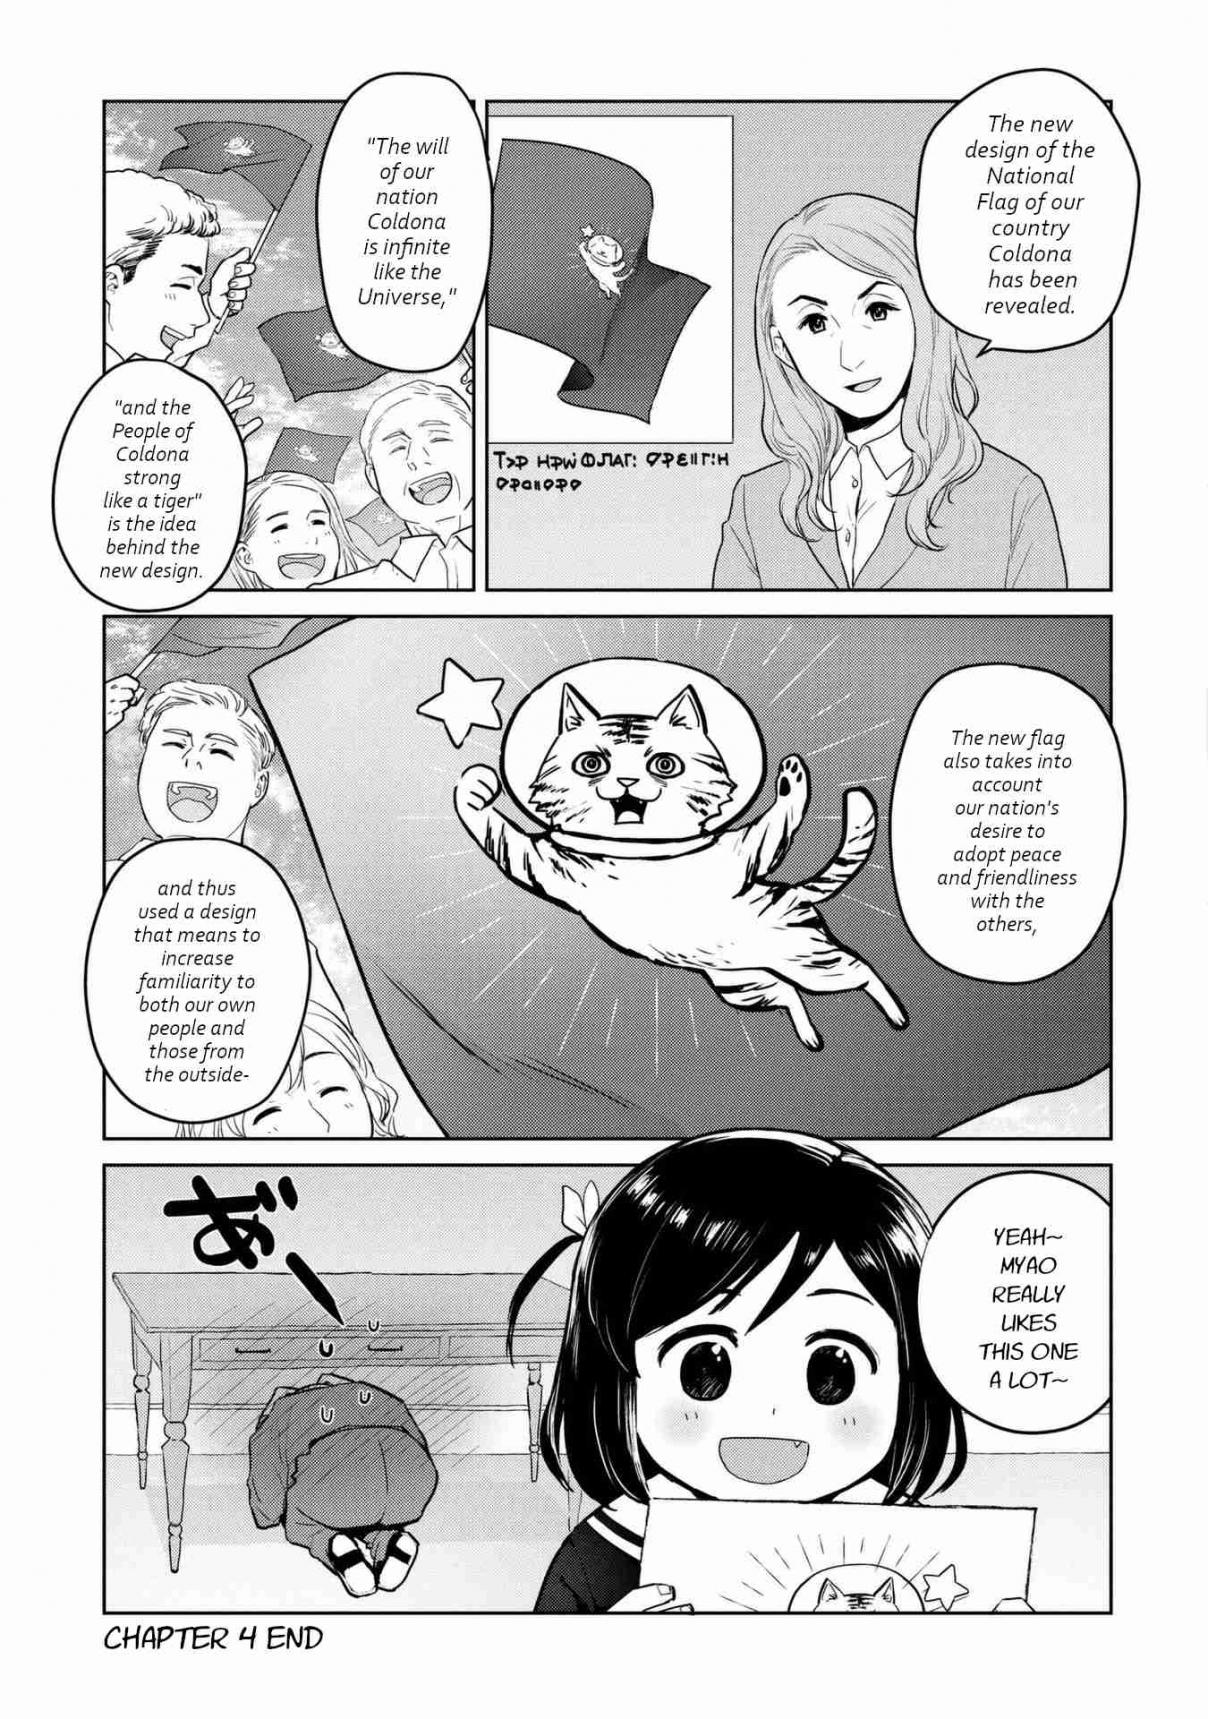 Oh, Our General Myao Vol. 1 Ch. 4 In Which Myao Changes the Flag